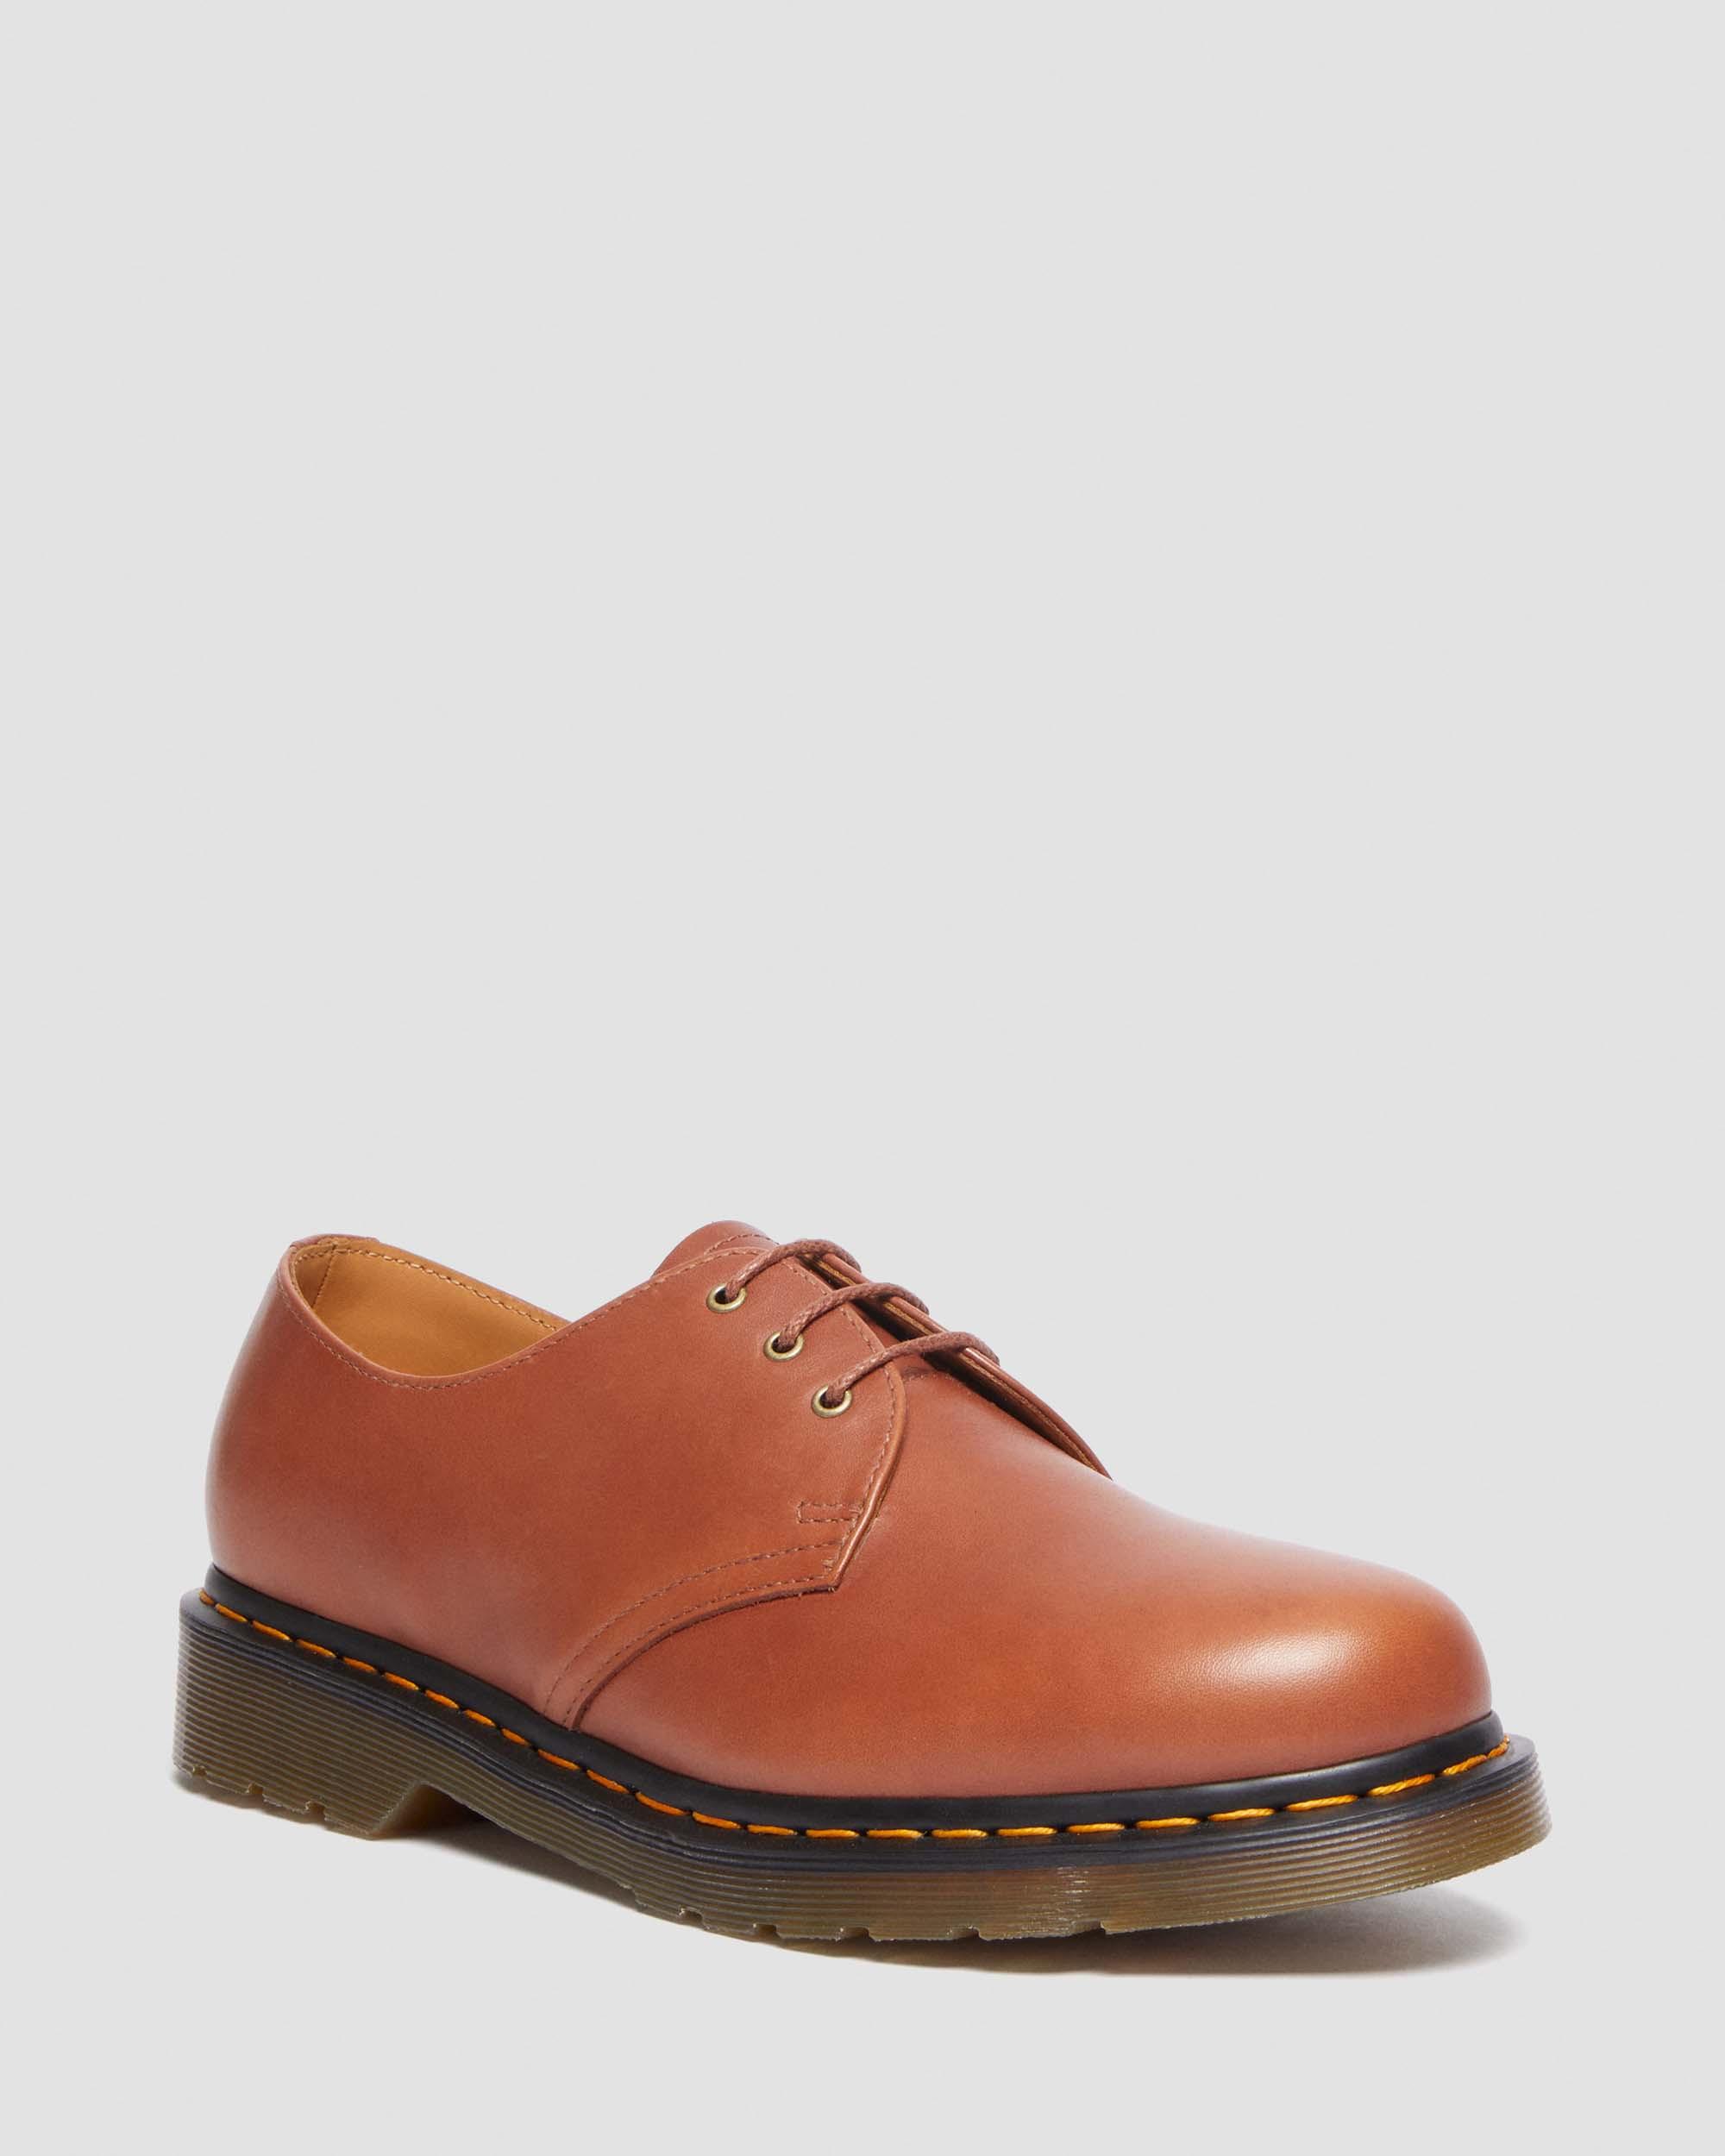 Dr. Martens 1461 Carrara Leather Oxford Shoes In Brown,tan | ModeSens